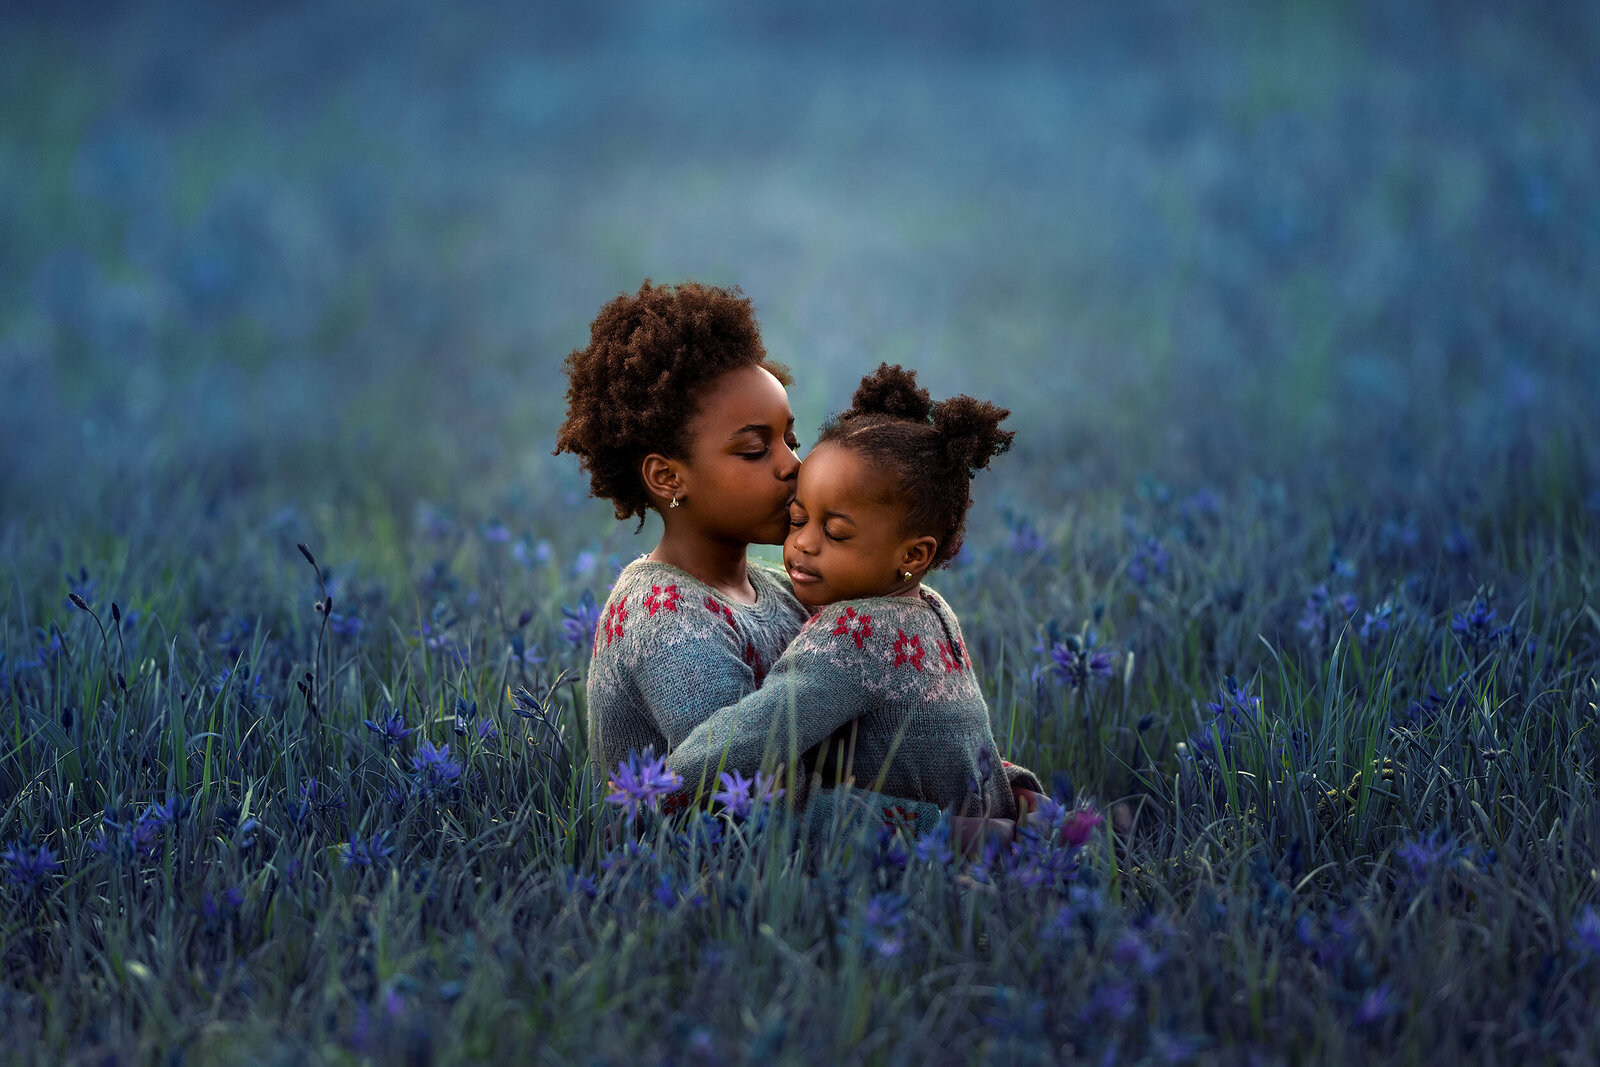 Two Black sisters share an embrace in a field of blue wildflowers.